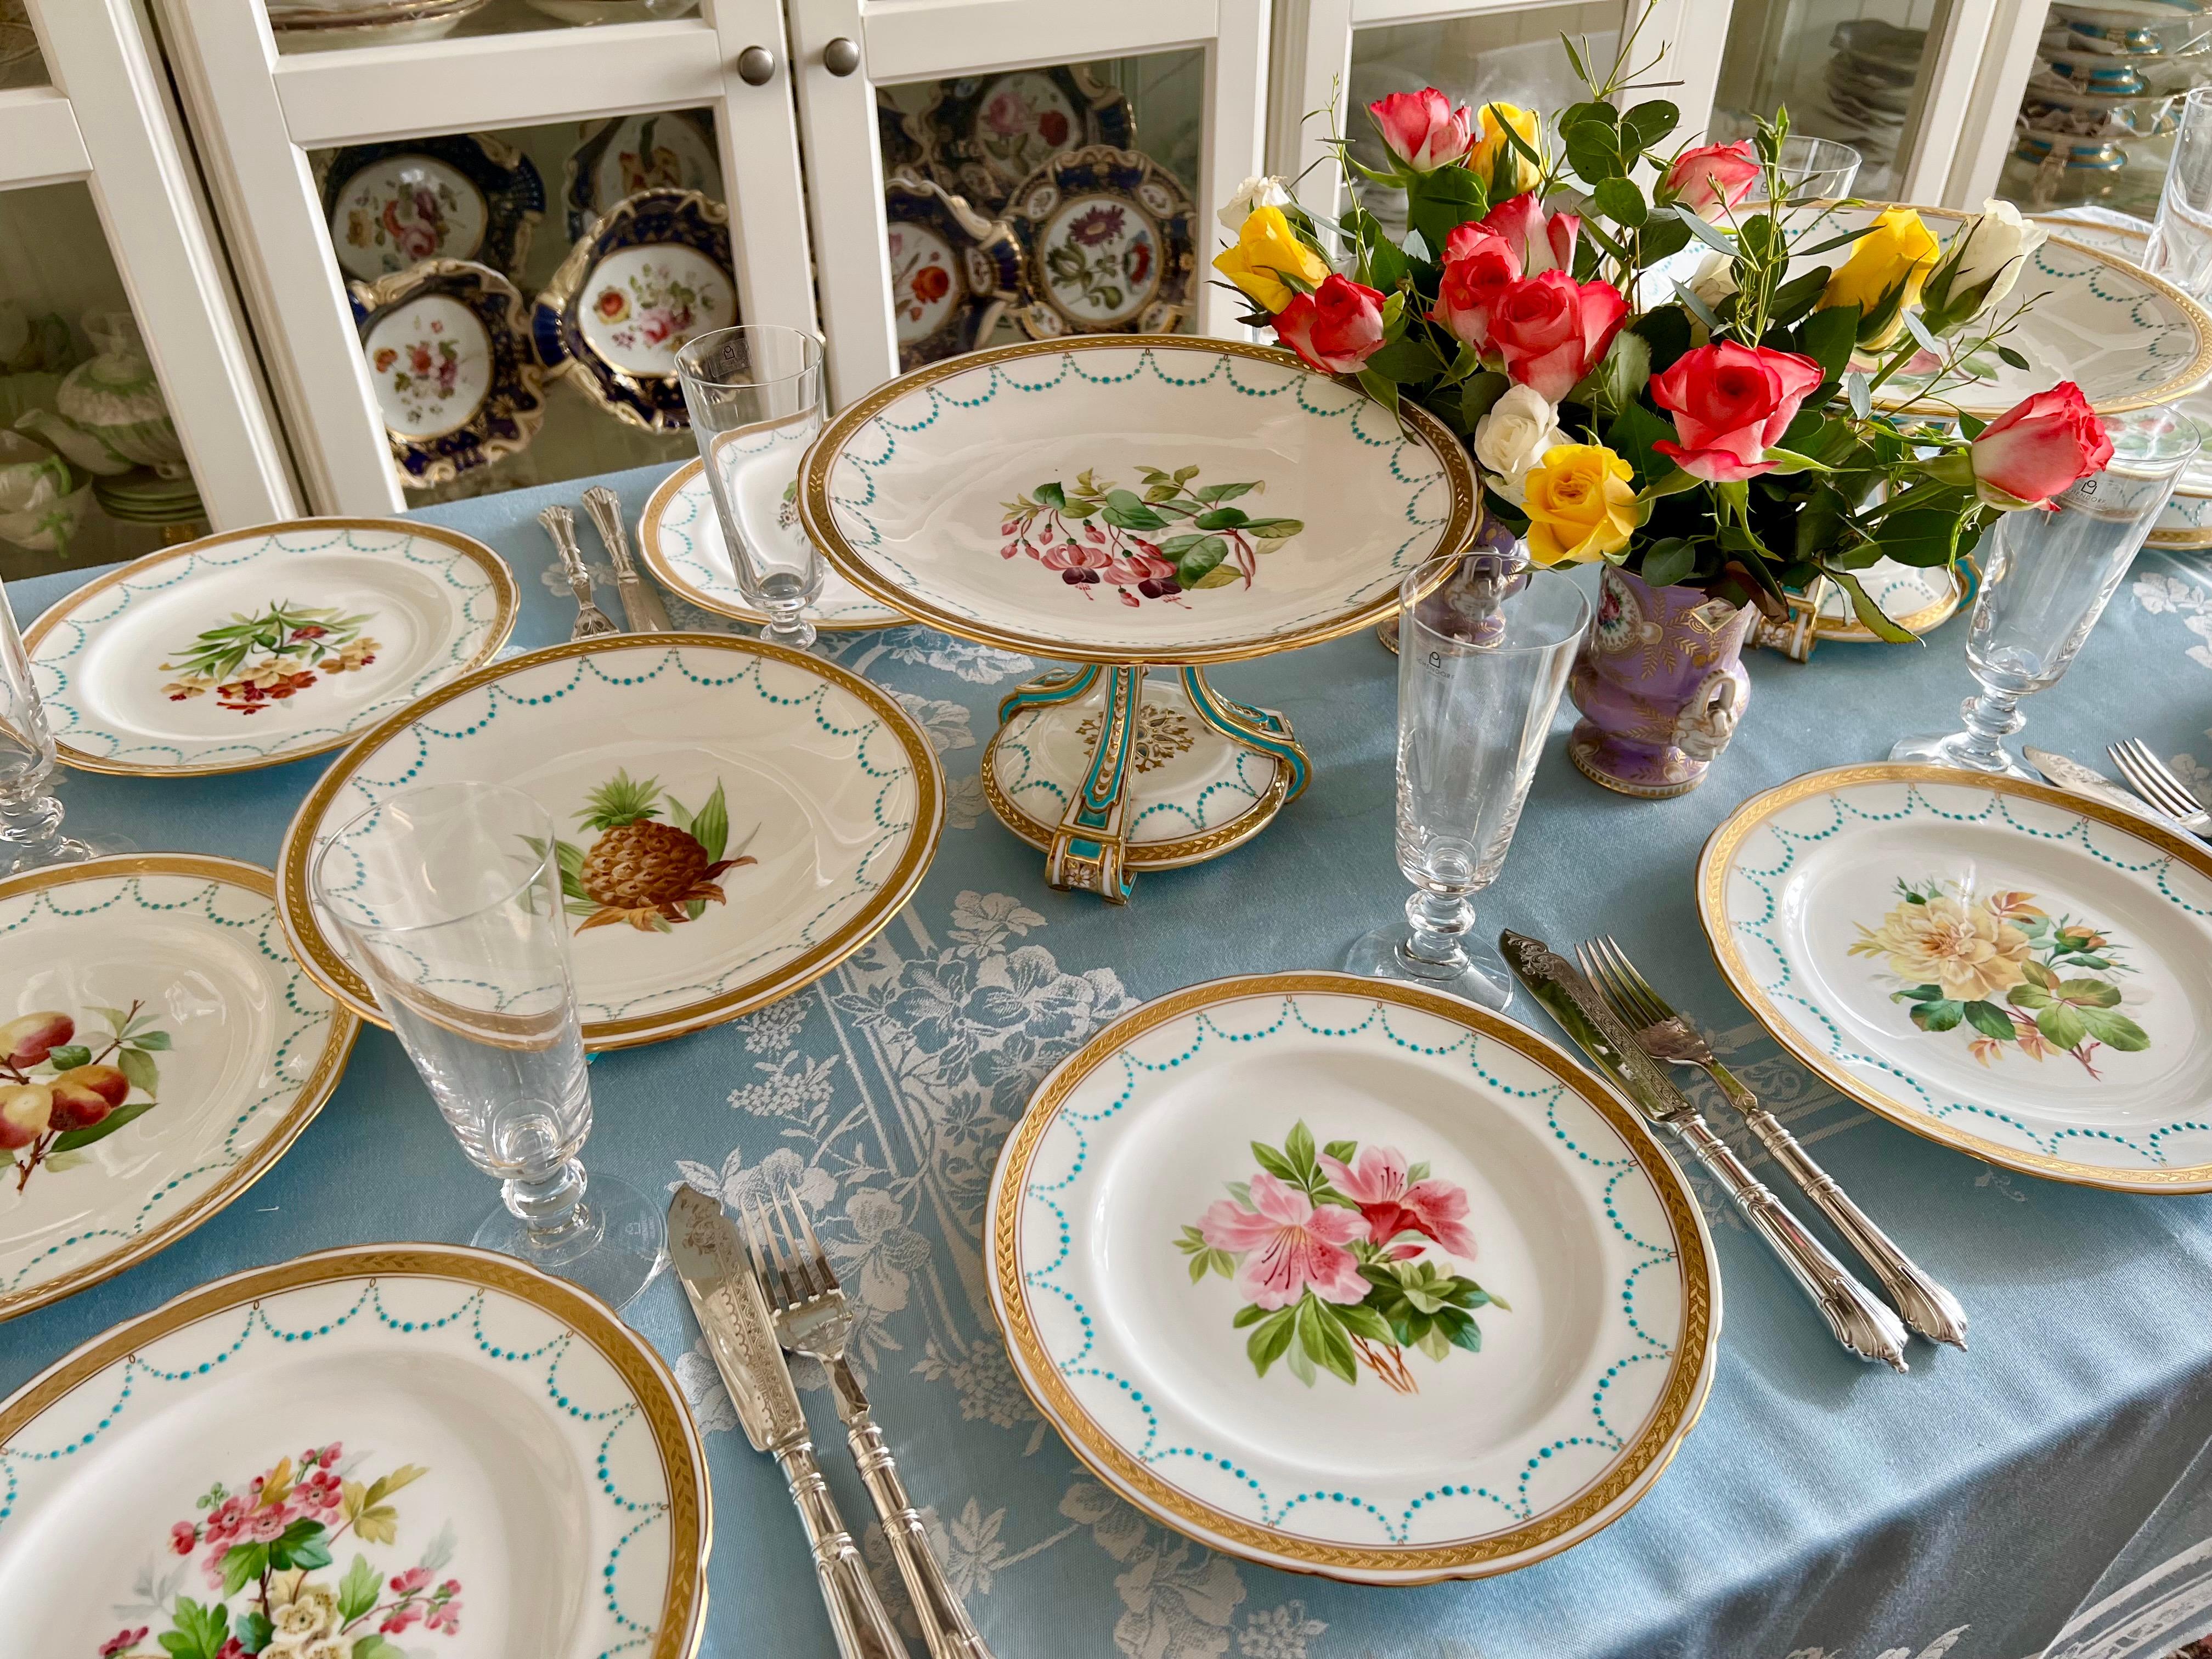 This is a beautiful dessert service made by Minton in 1870. The service consists of two high comports, two low comports, and twelve plates. All items have a white ground with refined acid gilt border and turquoise festoons, and each item is painted